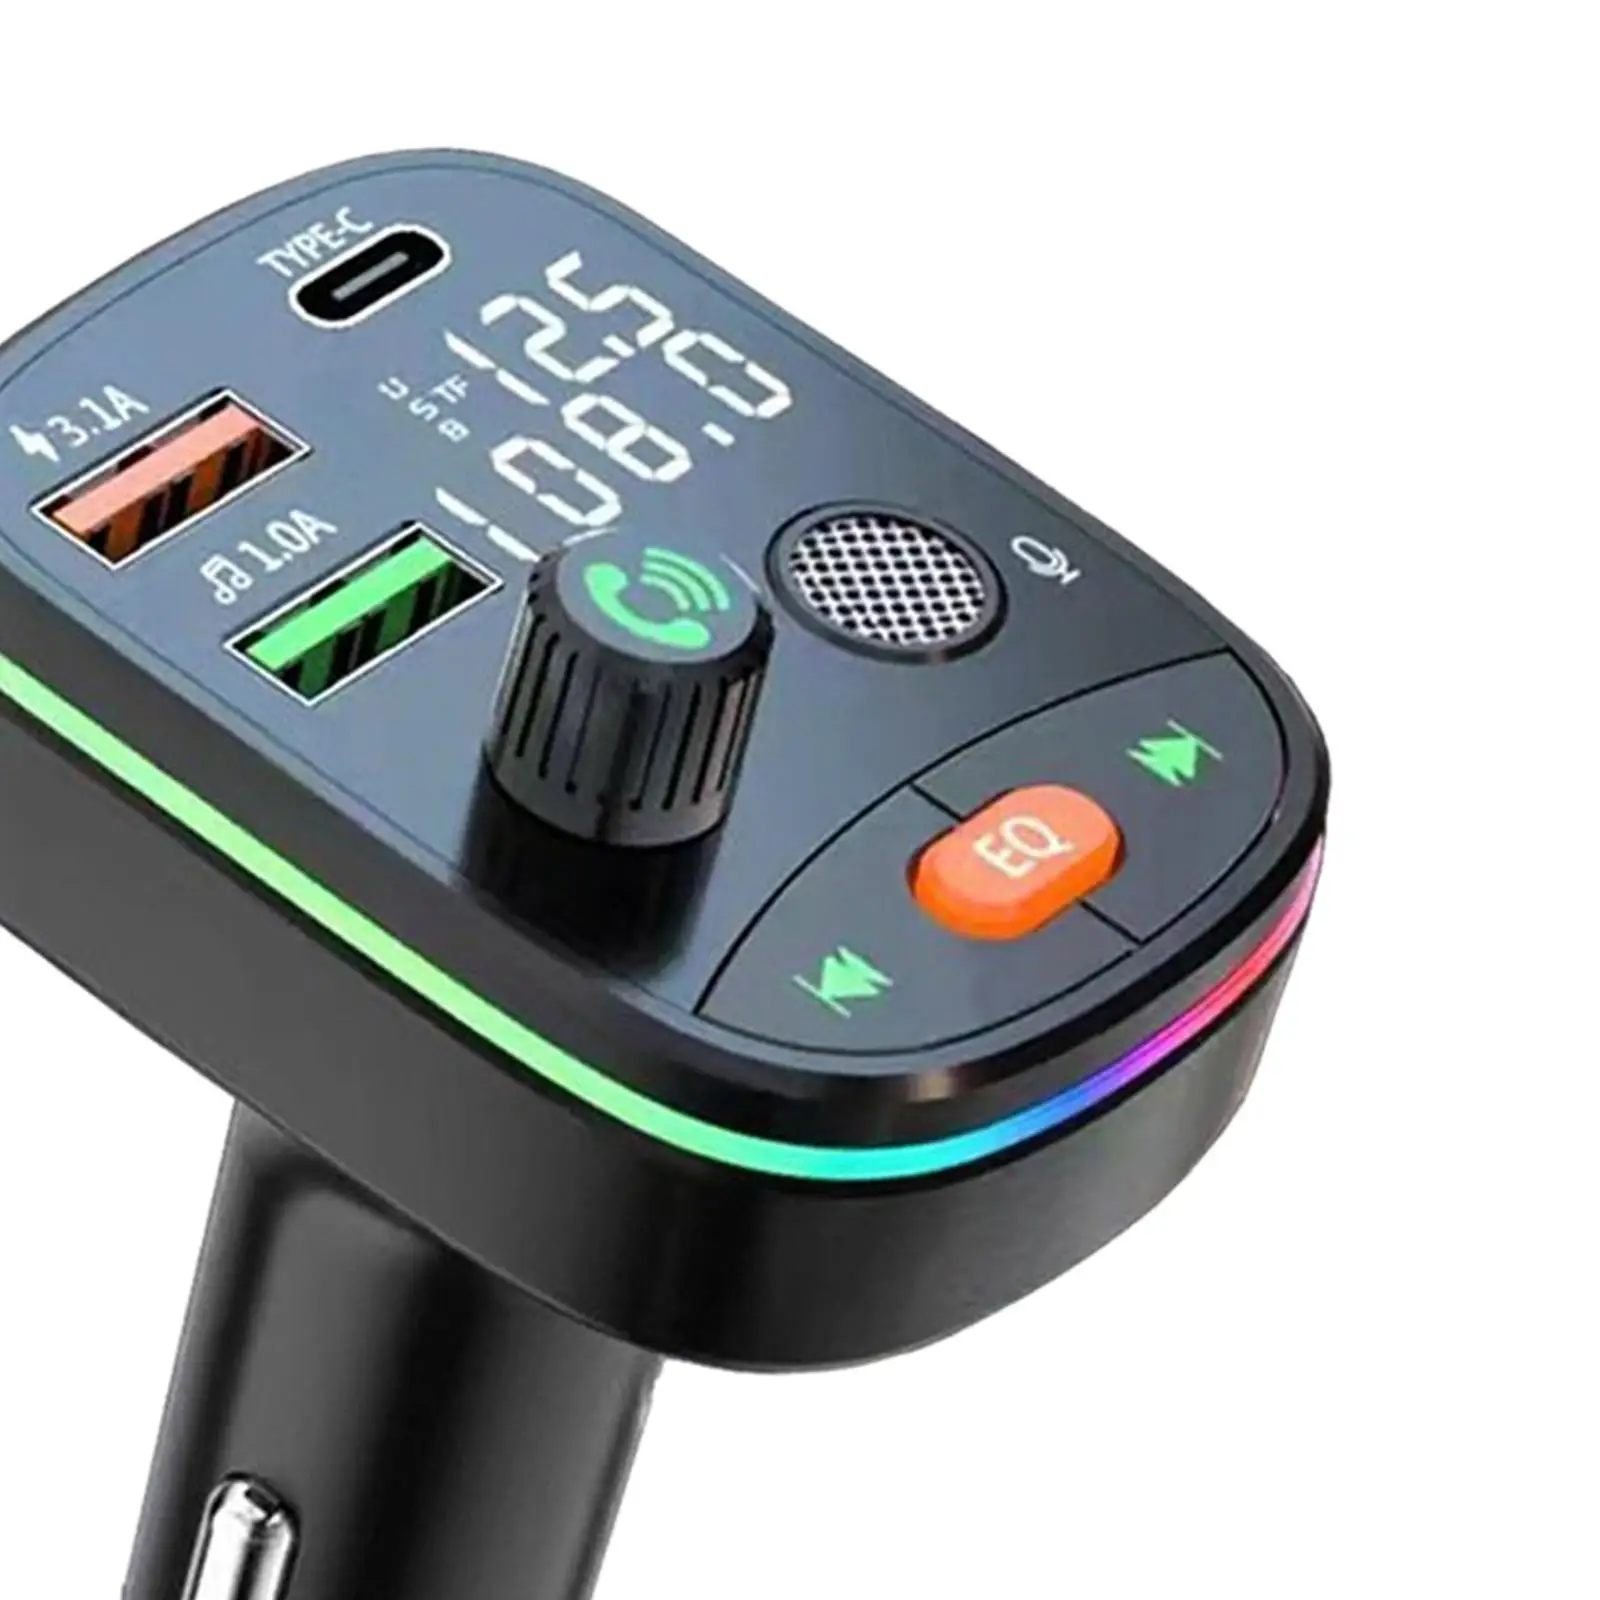 Bluetooth FM Transmitter Easy to Install Accessories Easy to Use Colorful Atmosphere Lights 80x57x42mm USB Disk Mic MP3 Player